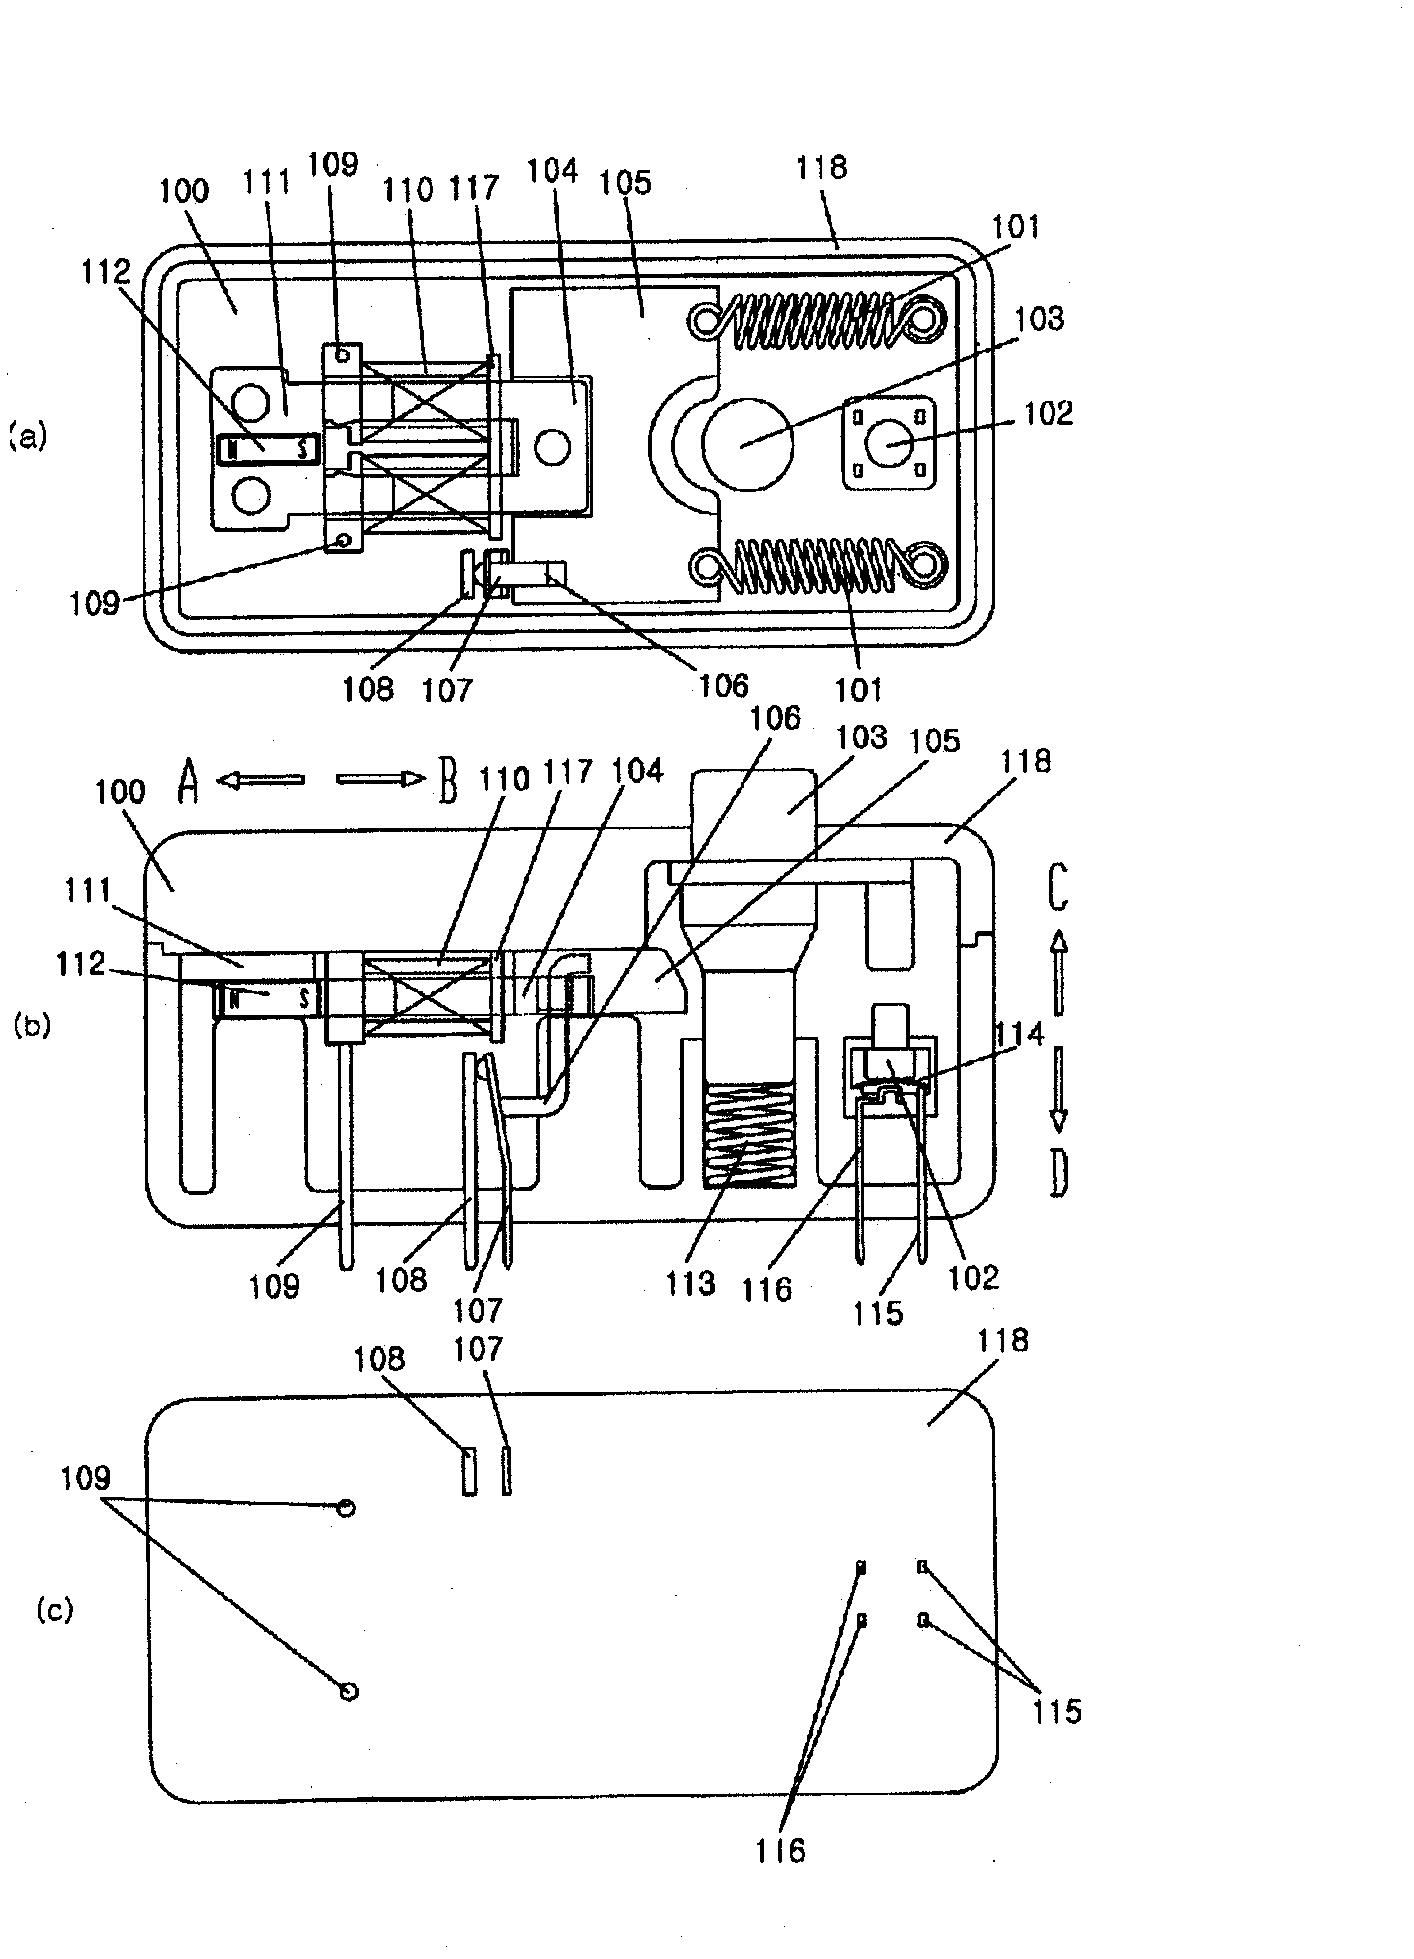 Standby power shut-off device and a control method therefor